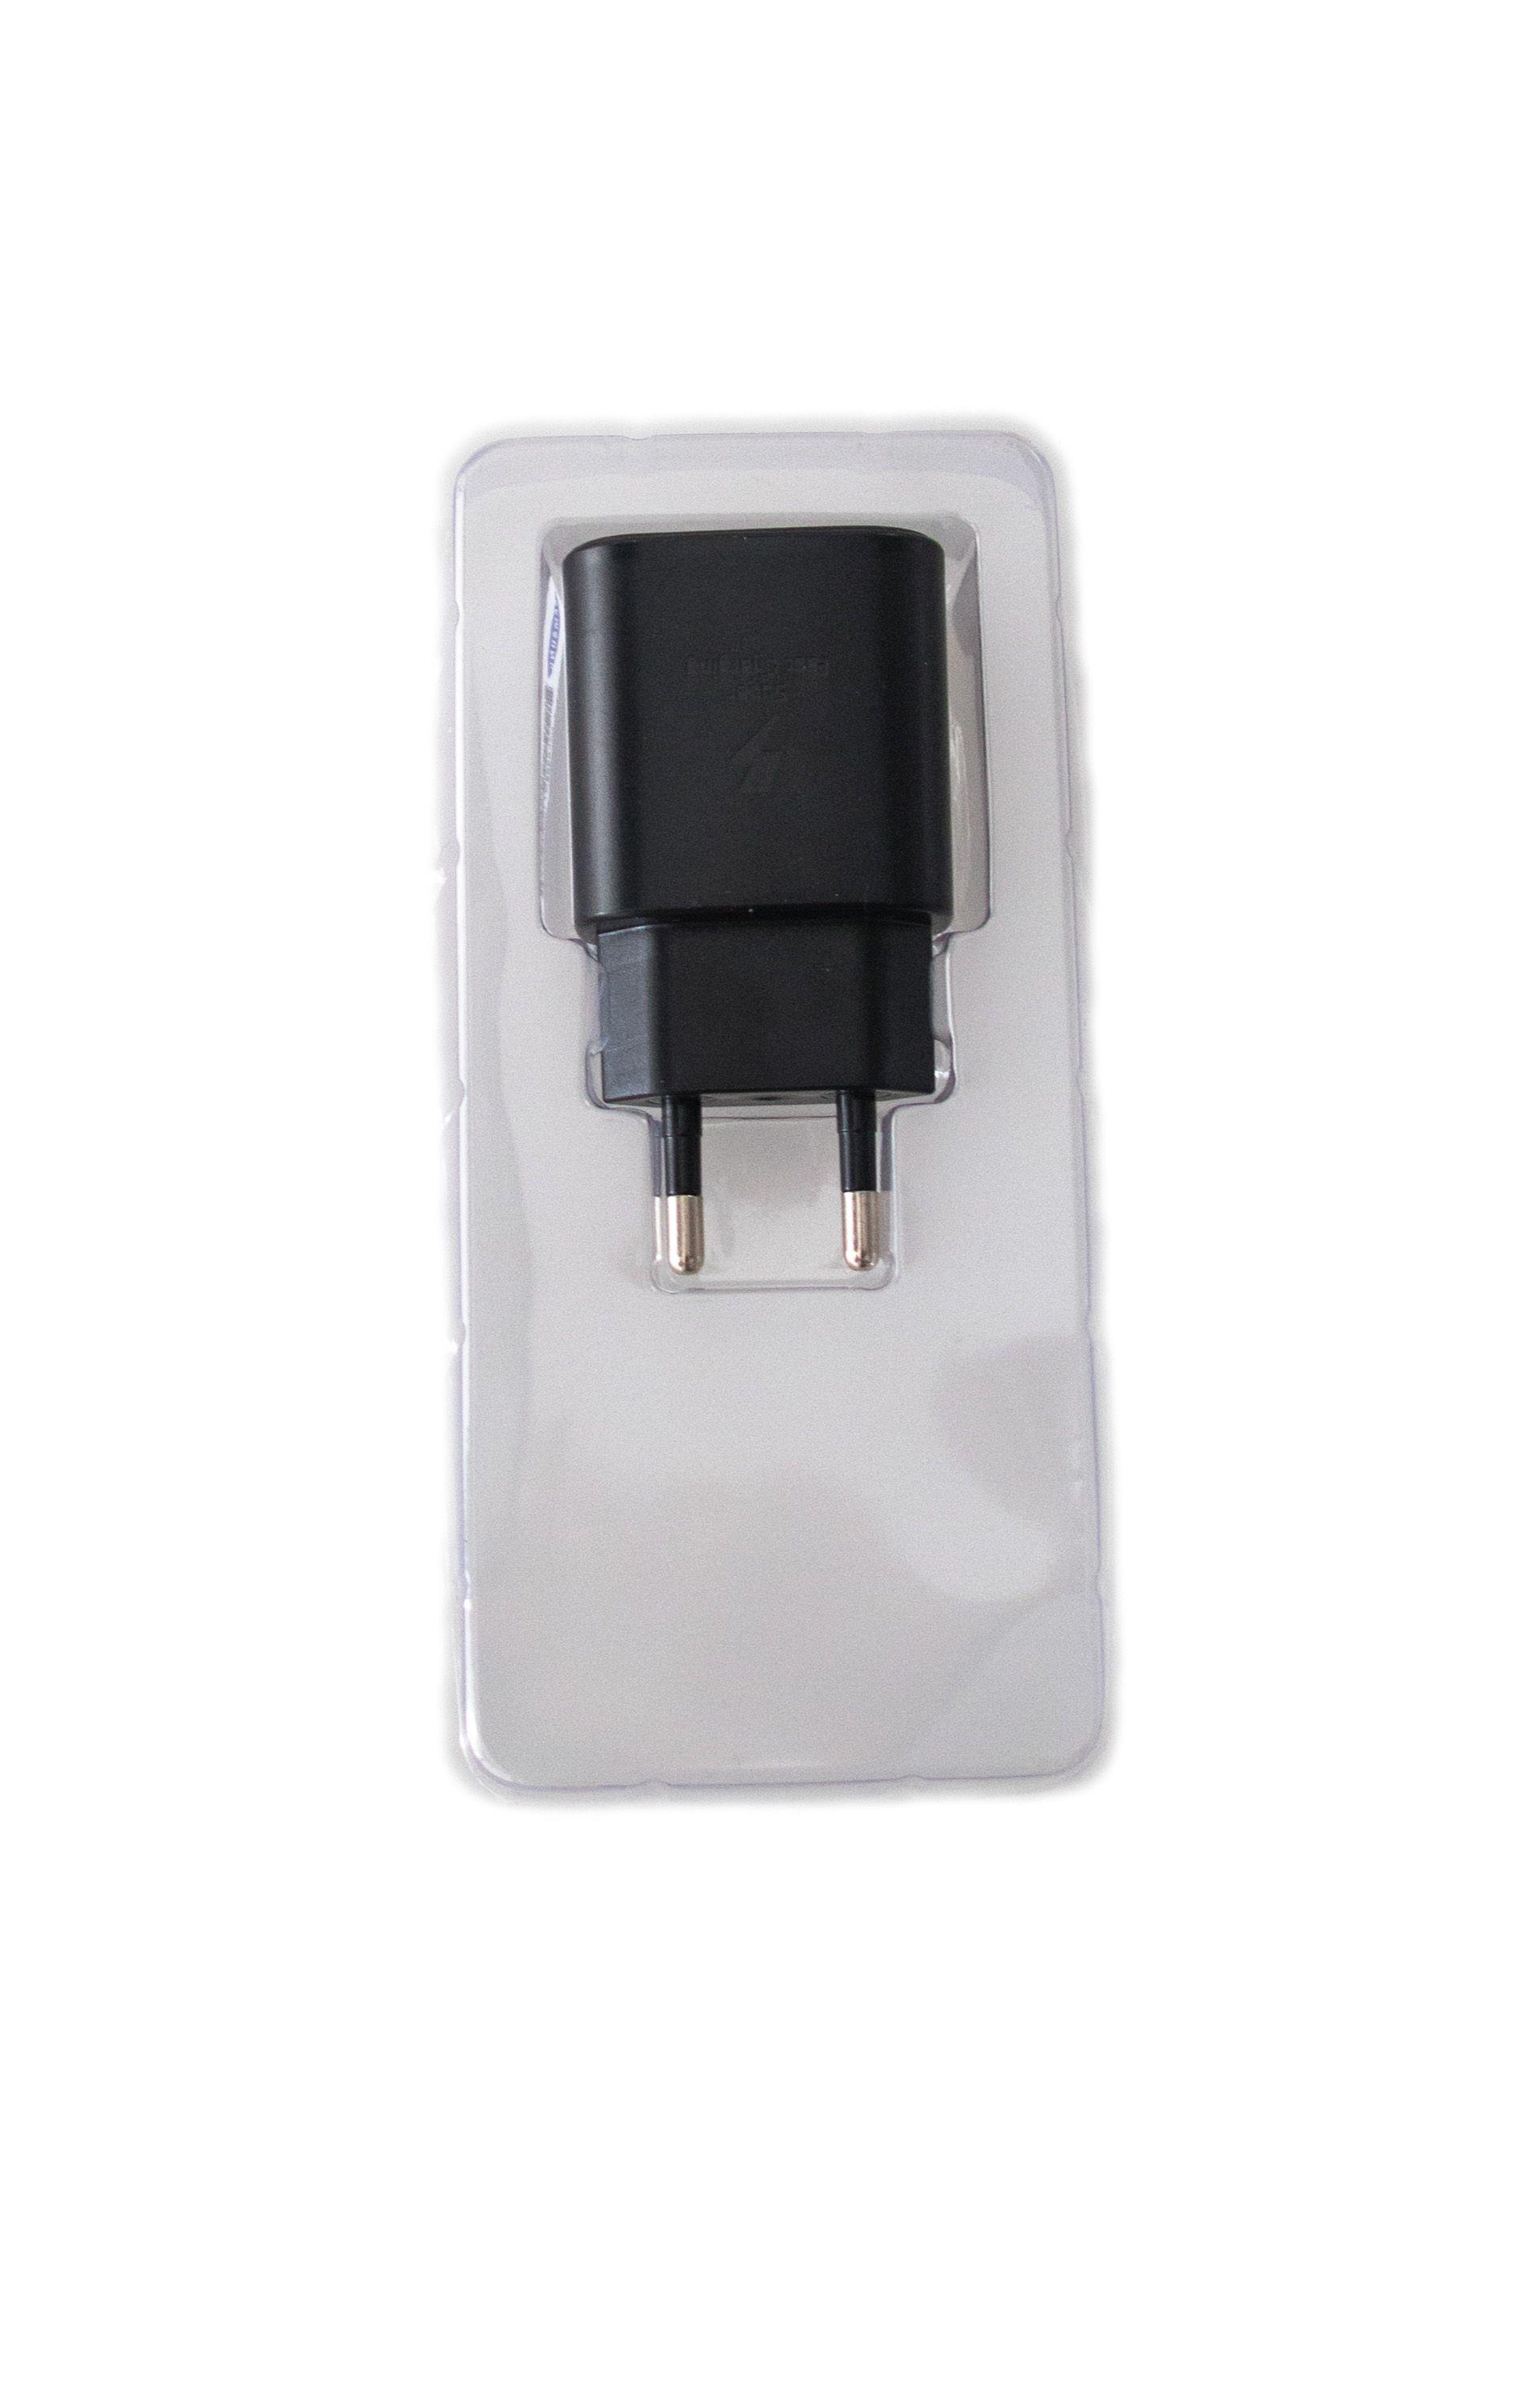 Charger Adapter PD Samsung Note 10 black